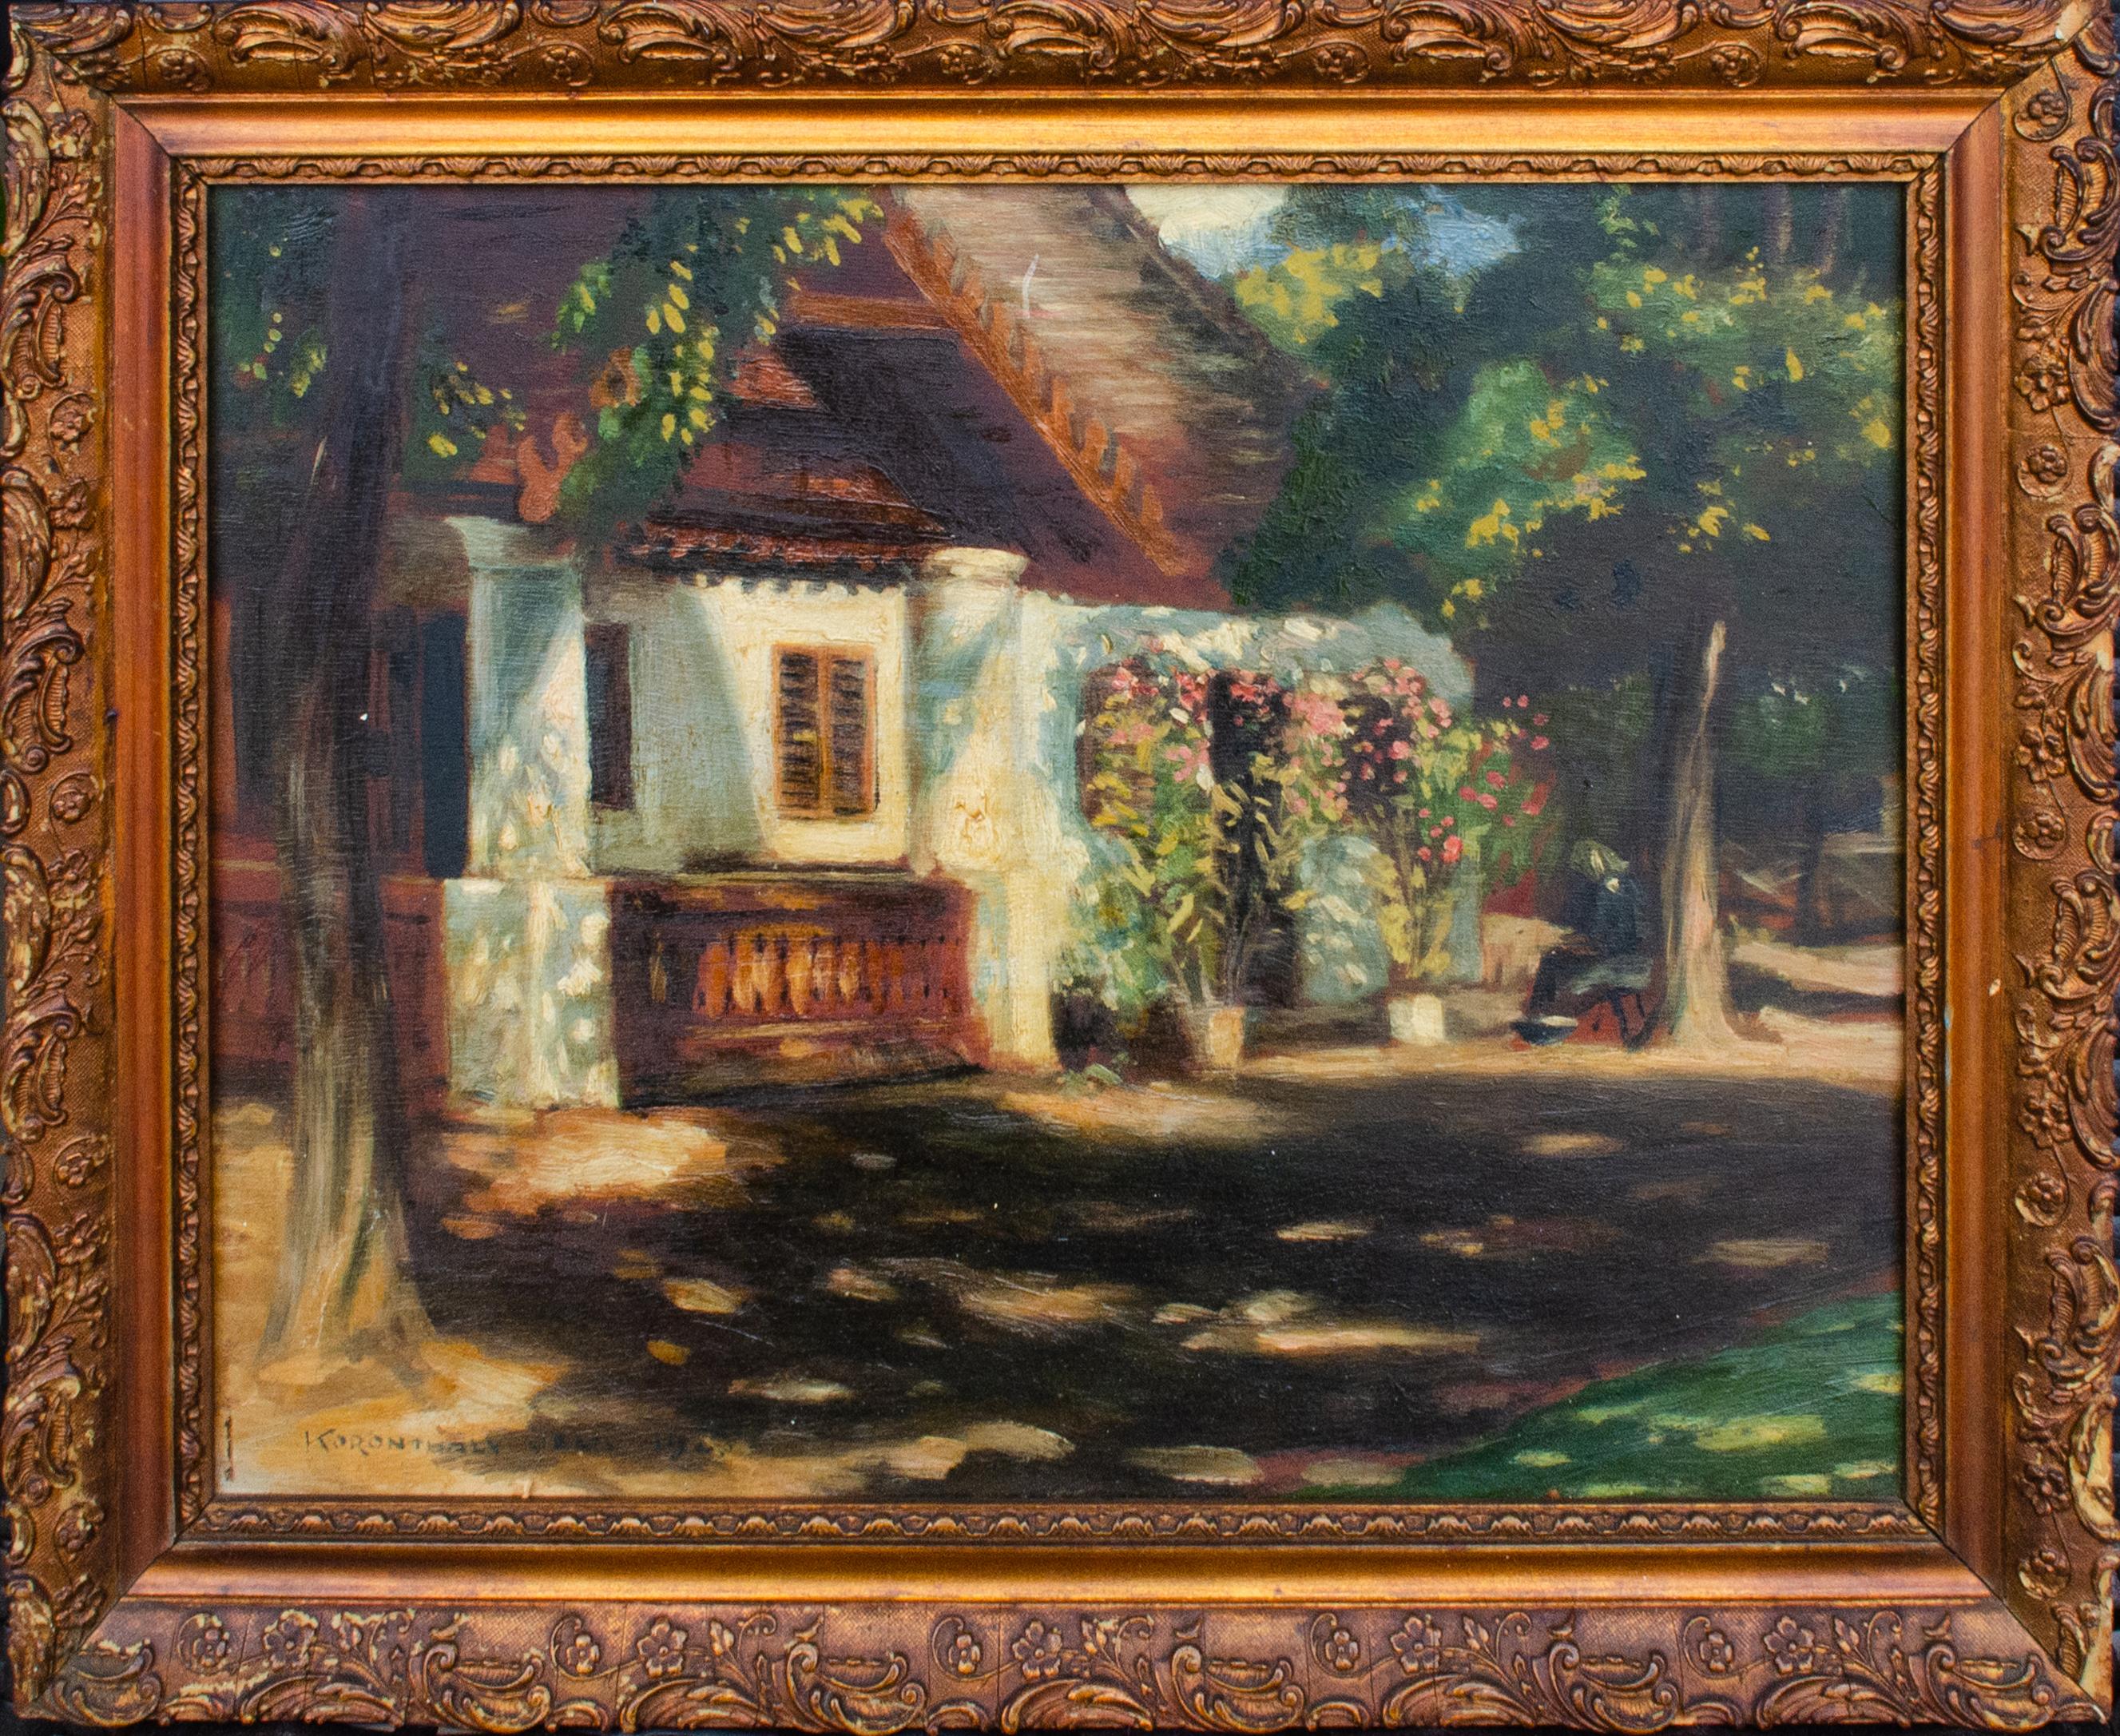 Koronthály Jenő (Hungarian, 1883-1973)
Untitled, 1923
Oil on wood panel
11 3/8 x 14 1/2 in.
Framed: 14 1/8 x 17 1/4 x 1 in.
Signed and dated lower left

A Hungarian artist, Koronthály Jenő studied with Edvi Illés Aladár at the Academy of Fine Arts